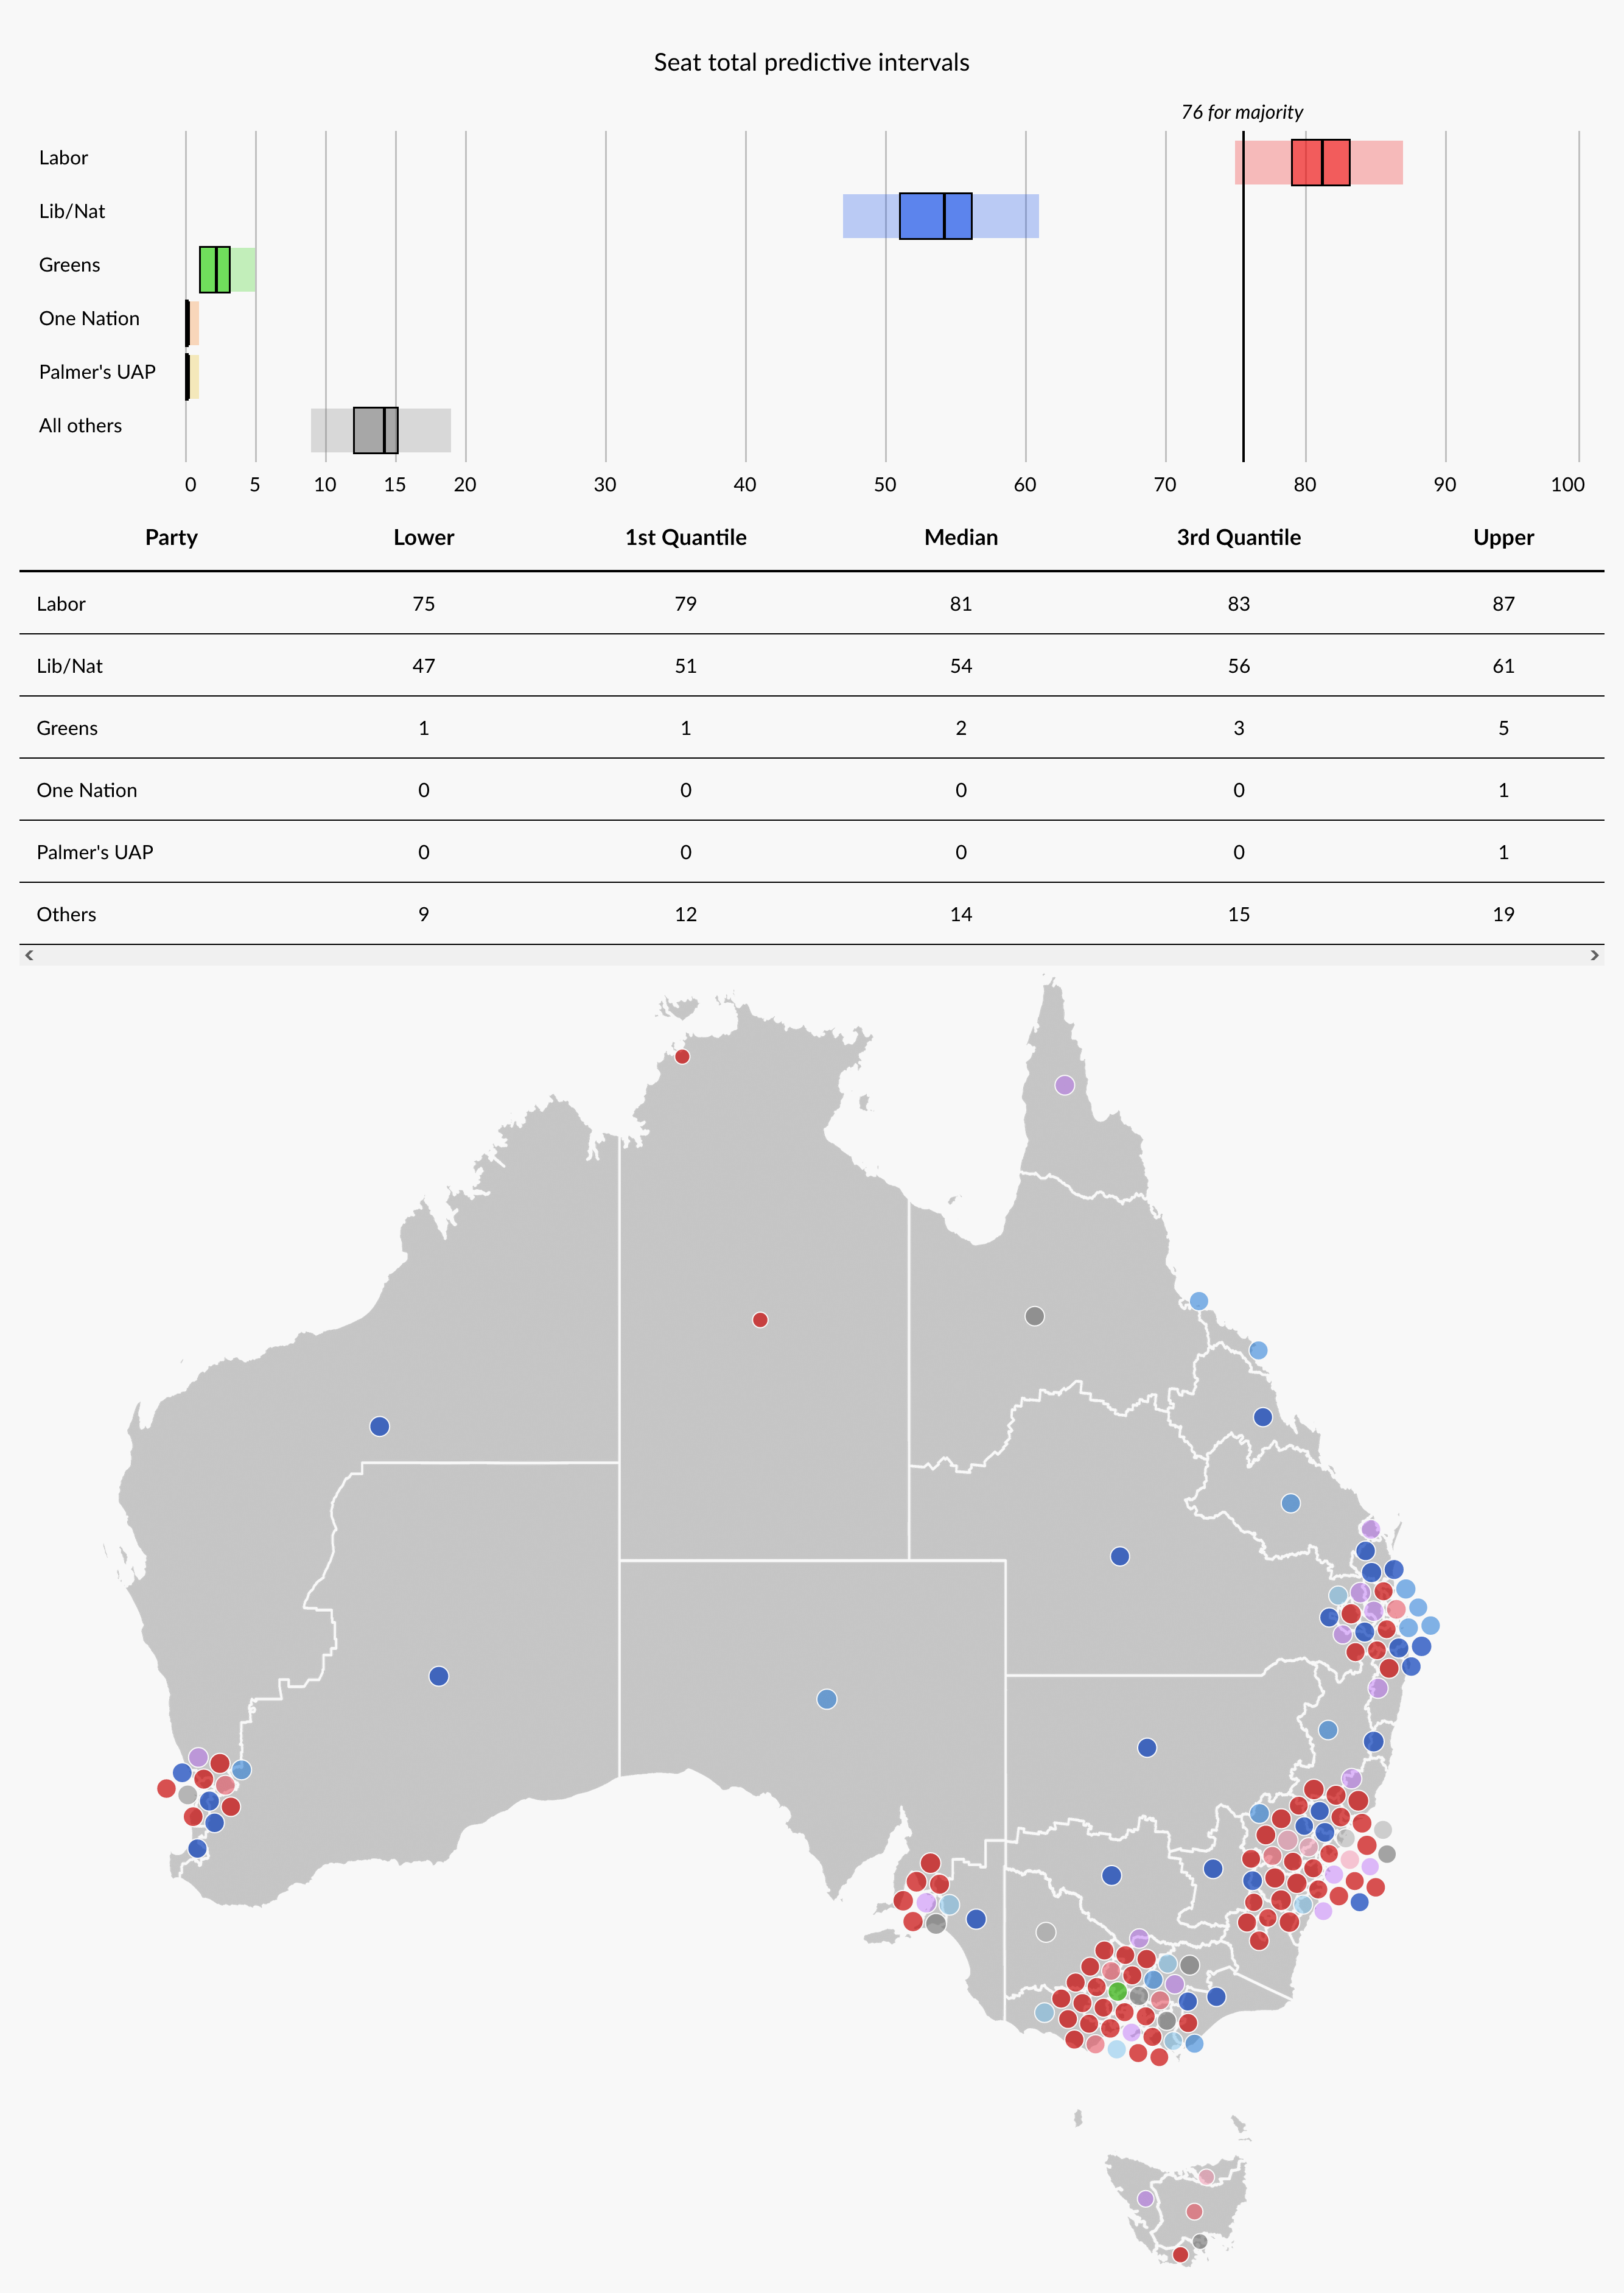 Simulated electoral map if Labor wins 53 on 2pp basis, with major-party-vote declining to 67